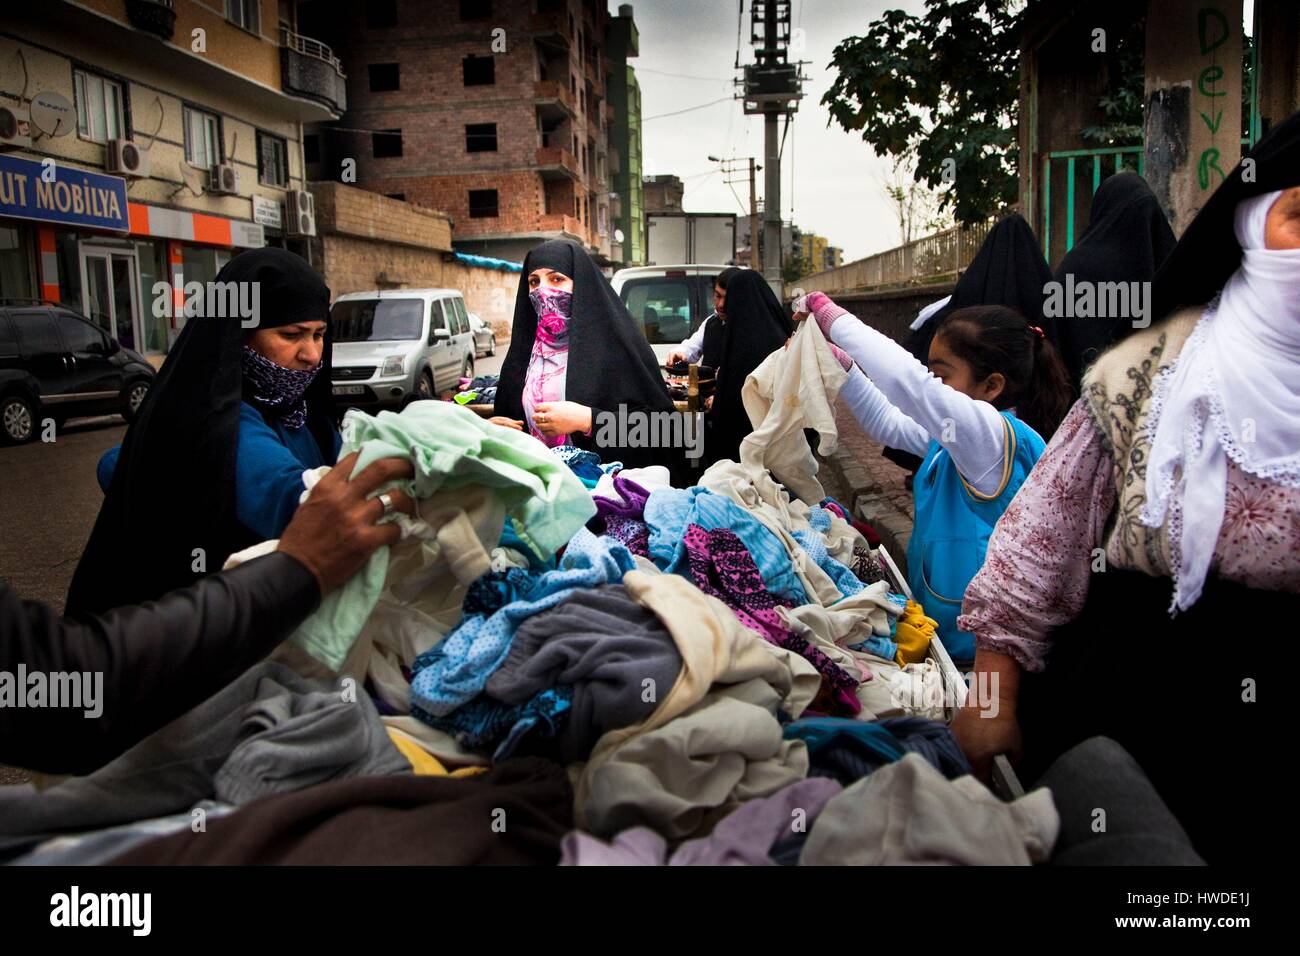 Turkey, South Eastern Anatolia, Sirnak Province, Cizre, women in chador buying clothes in a street market Stock Photo